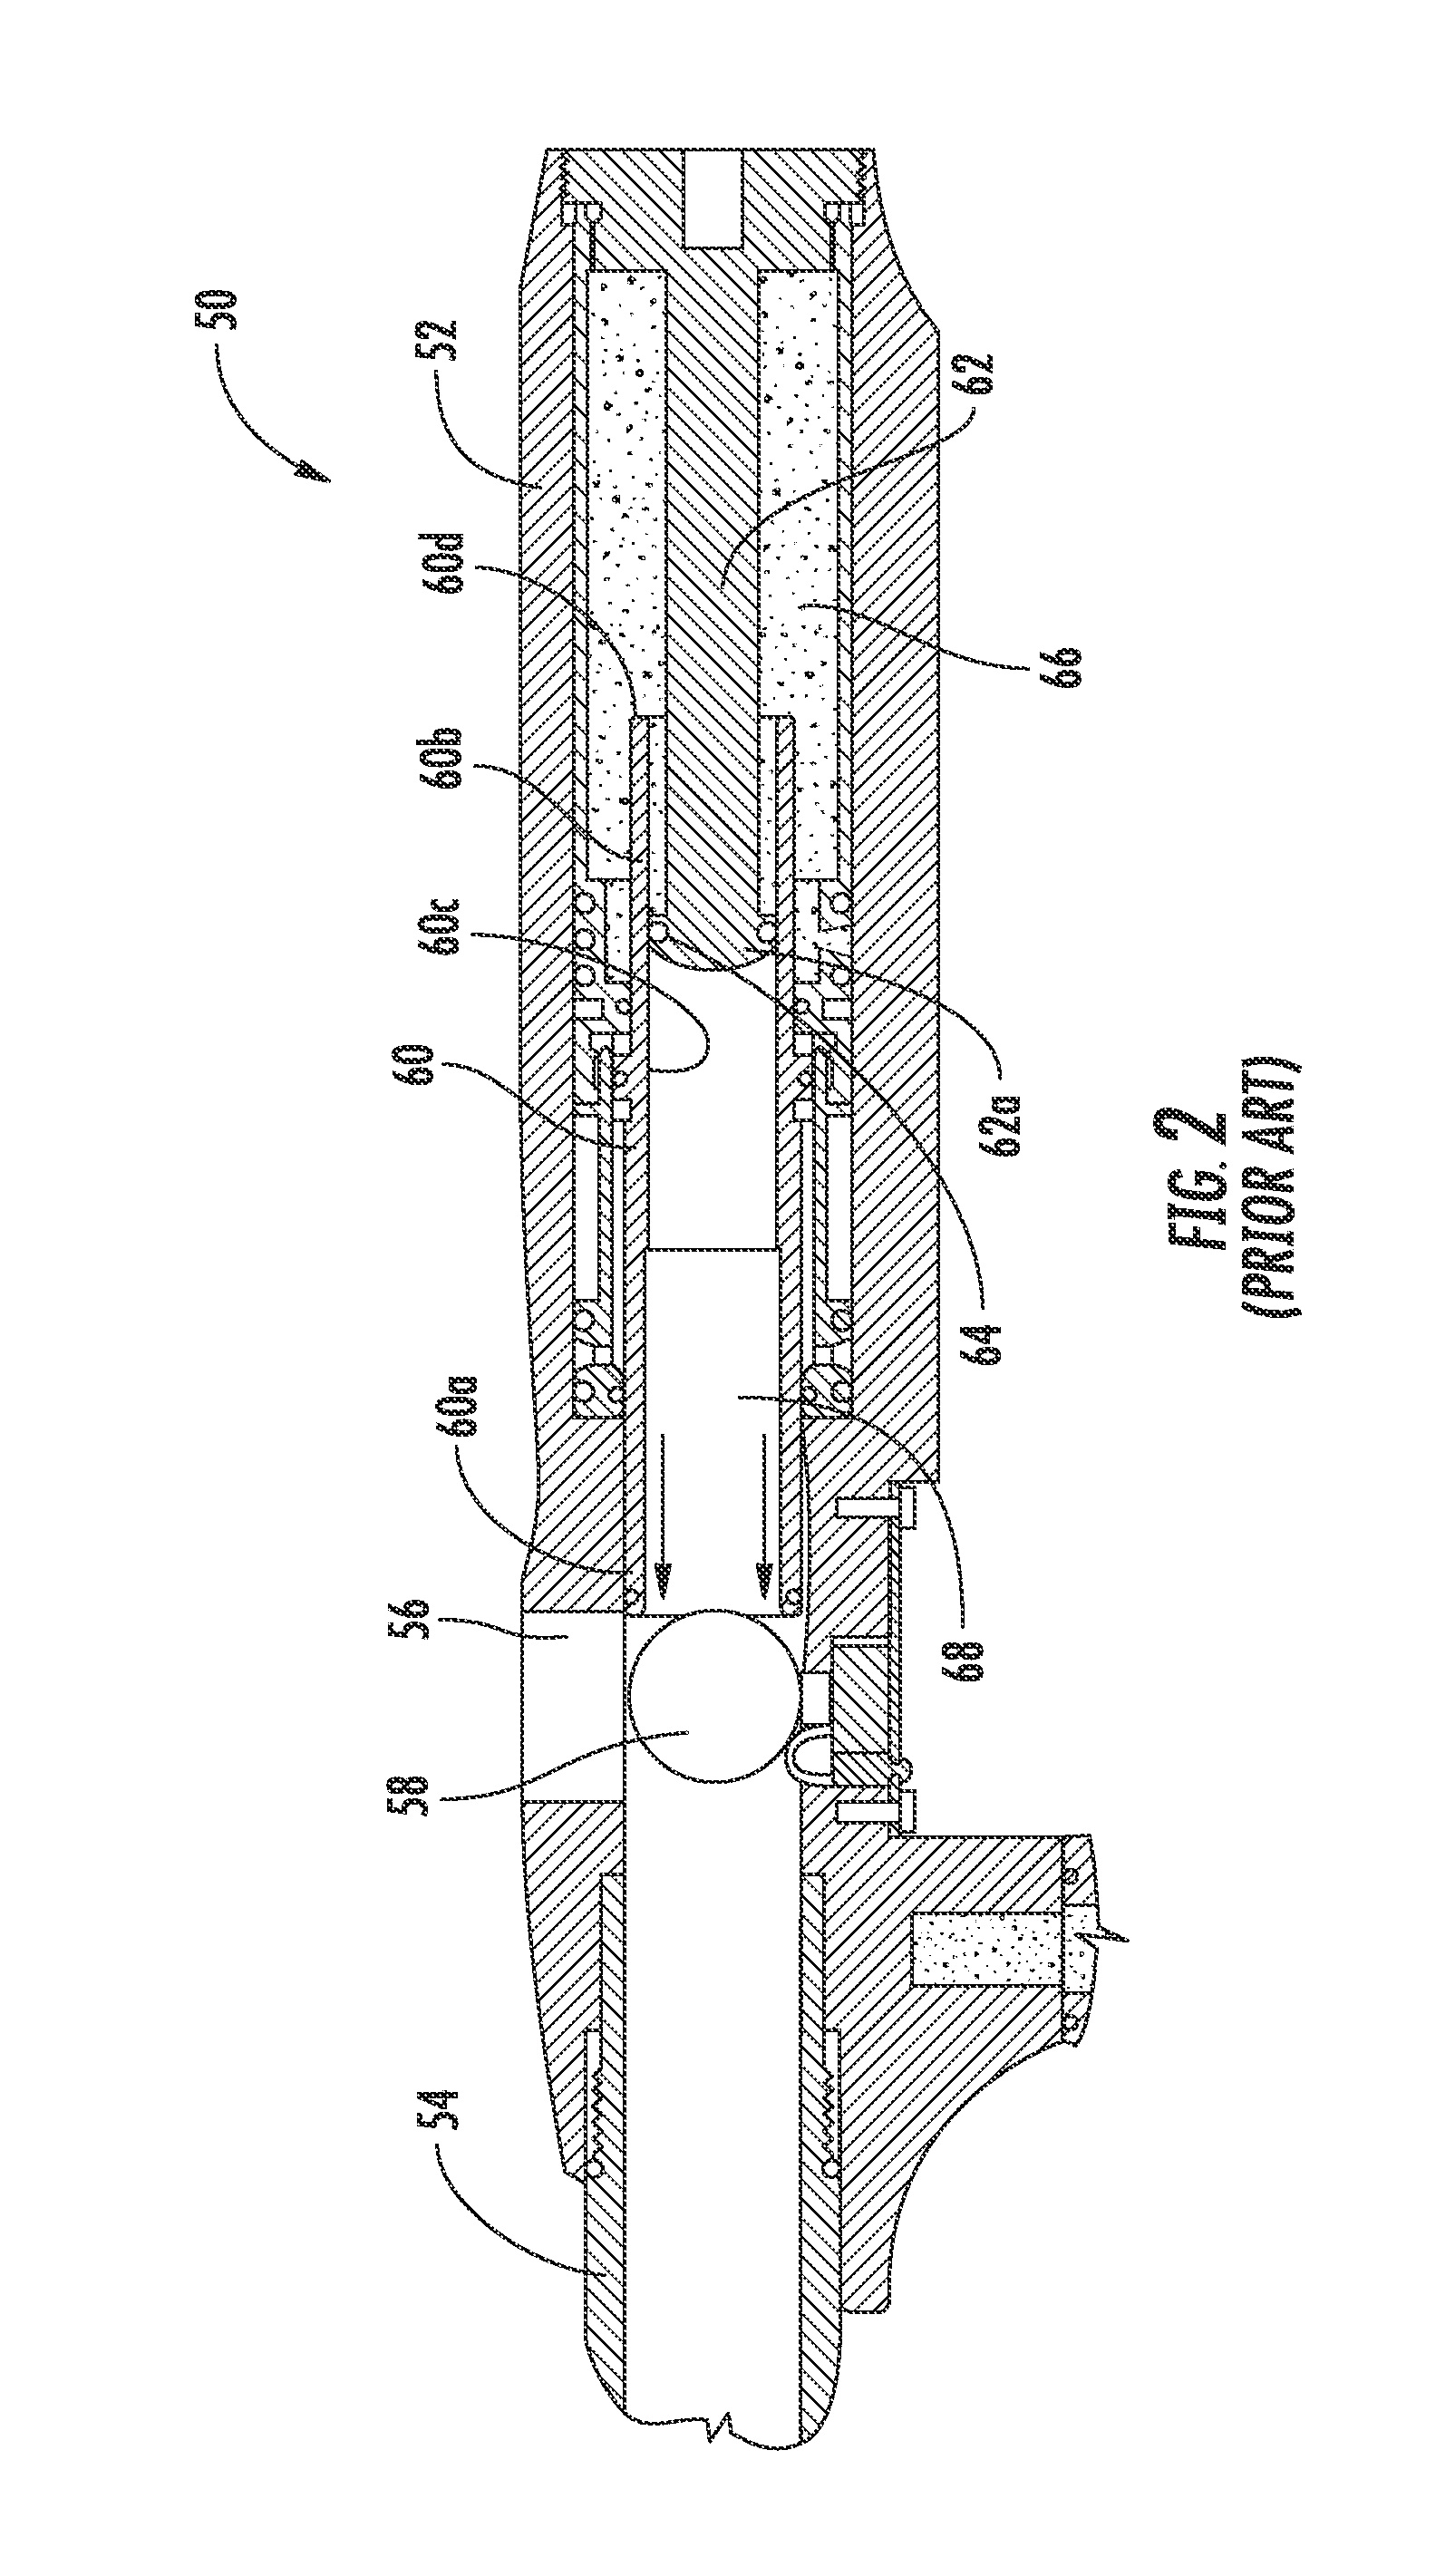 Bolt and valve mechanism that uses less gas